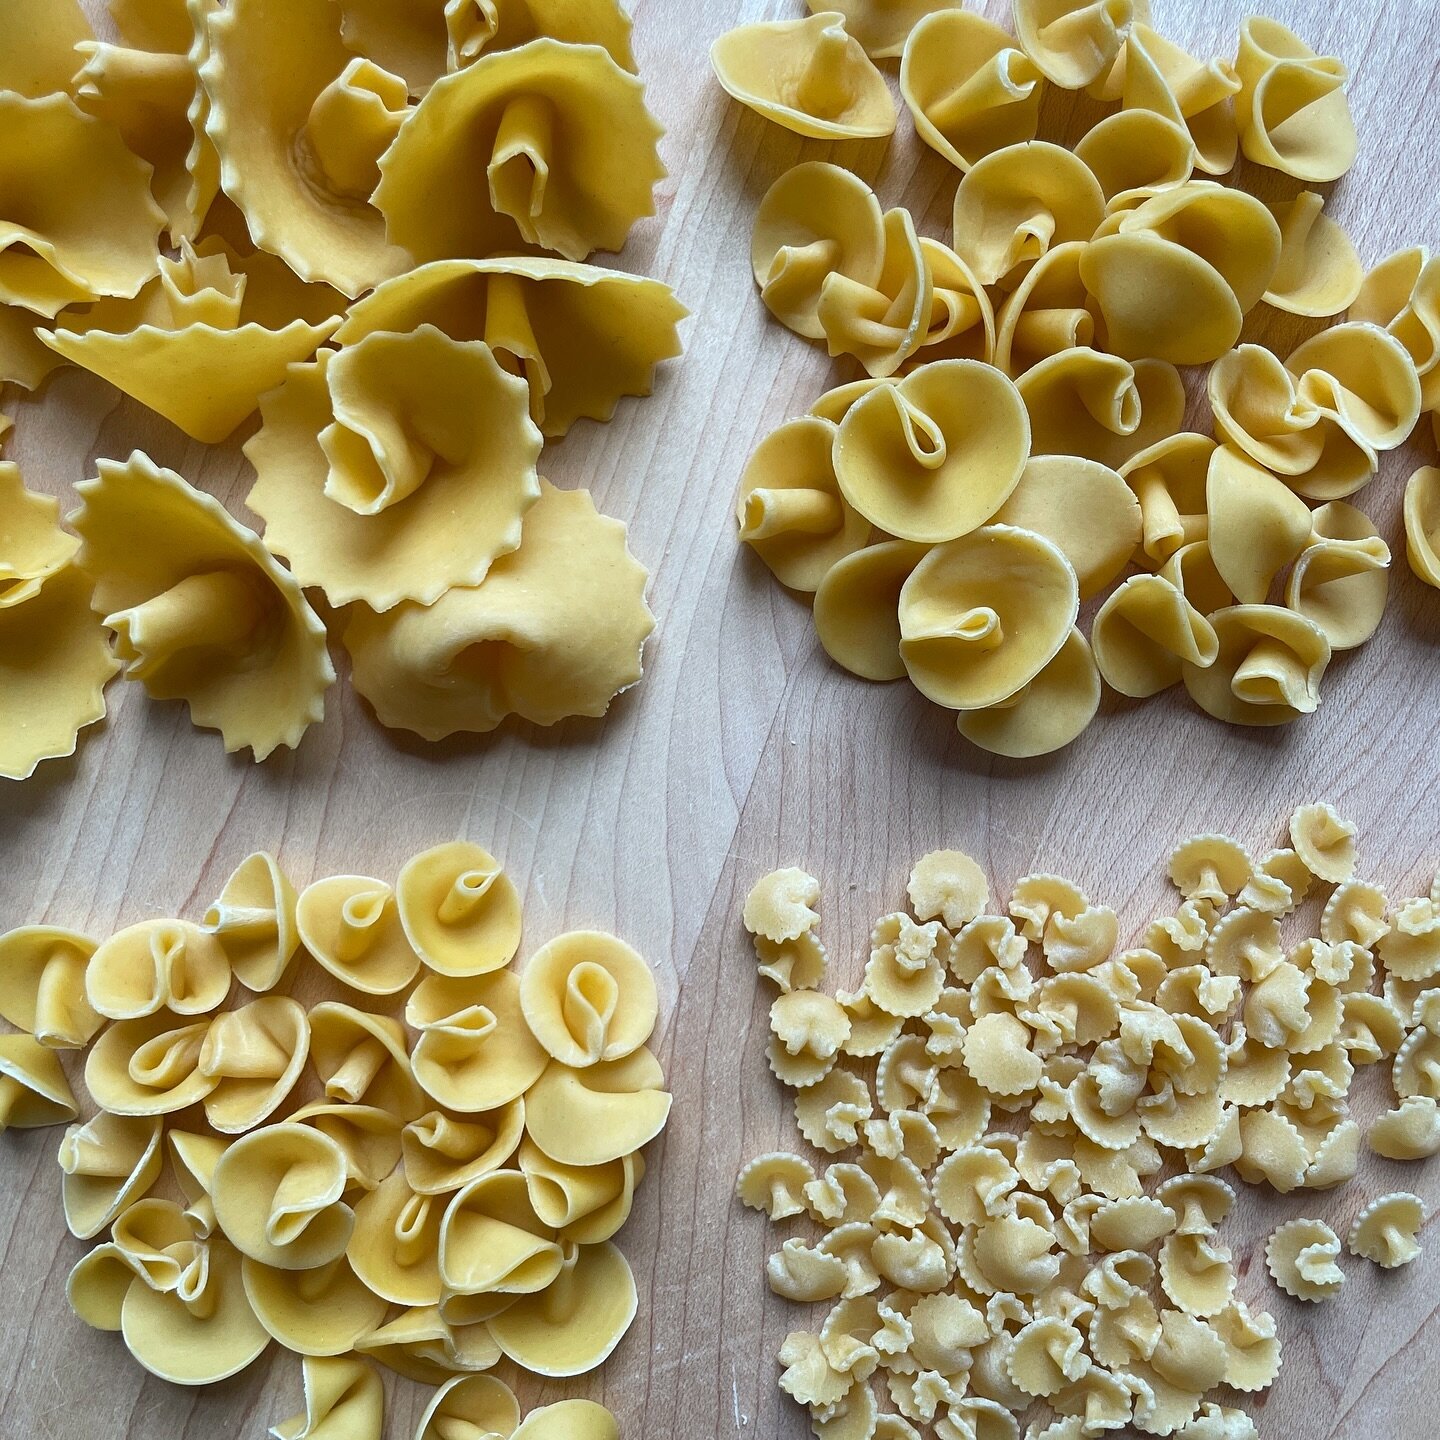 Spent an afternoon playing around to recreate (bigger) versions of a pasta I&rsquo;ve had laying around in the back of my pantry. Seen in the bottom right, they&rsquo;re called &ldquo;margherite,&rdquo; or daisies 🌼
. 
.
.
. 
#pasta #pastaia #cucina